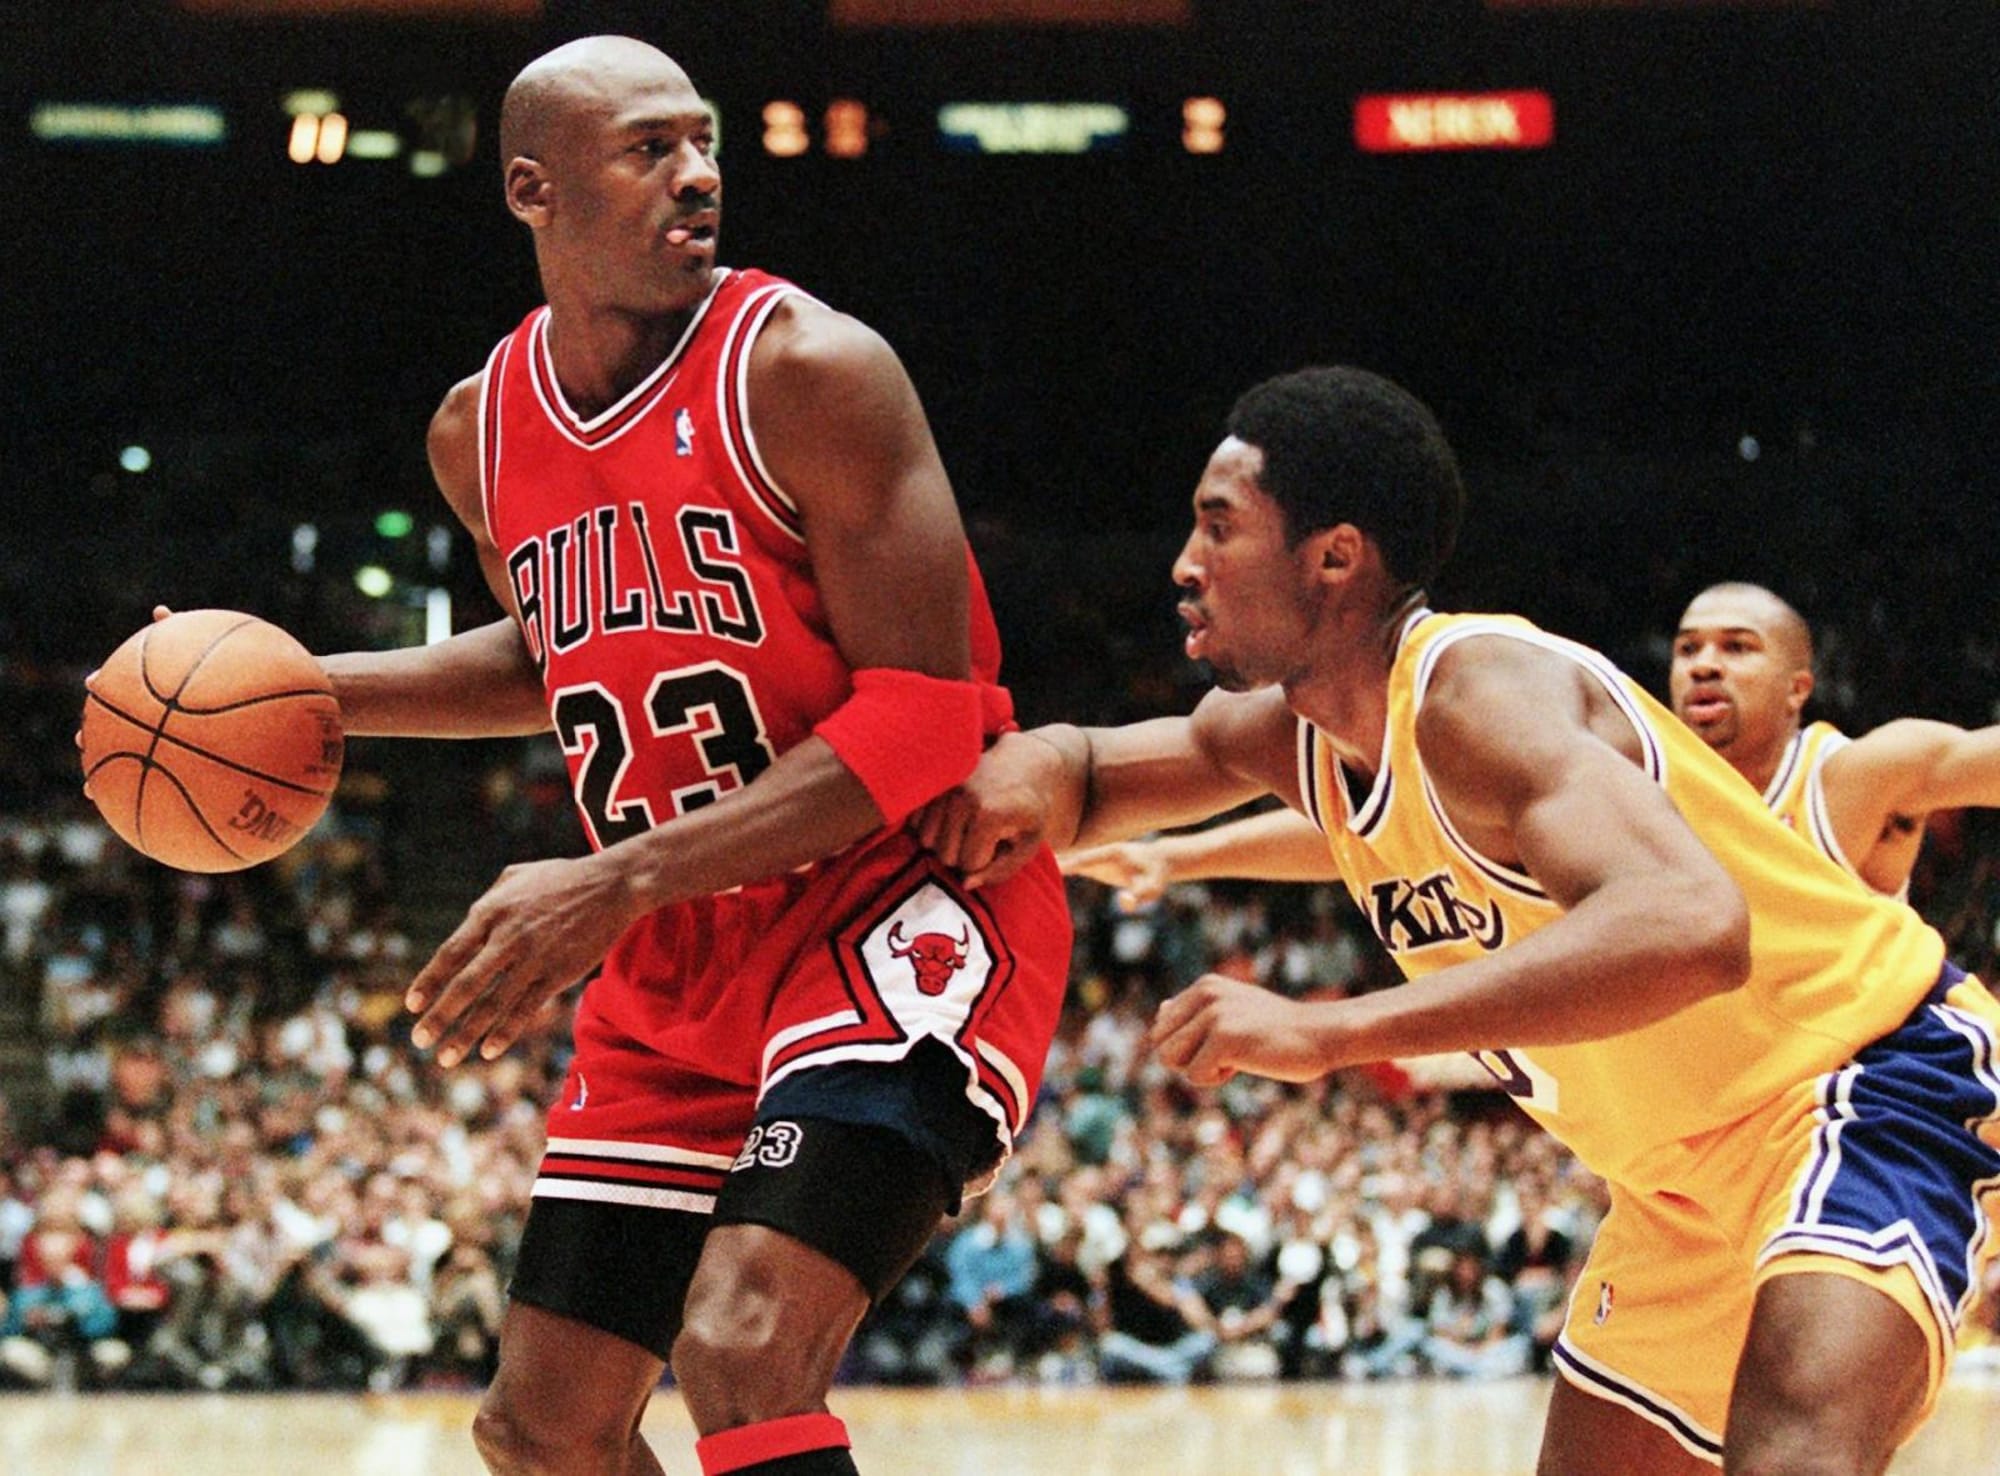 Best NBA players of all time: Ranking the Top 75 - Nos. 75-51